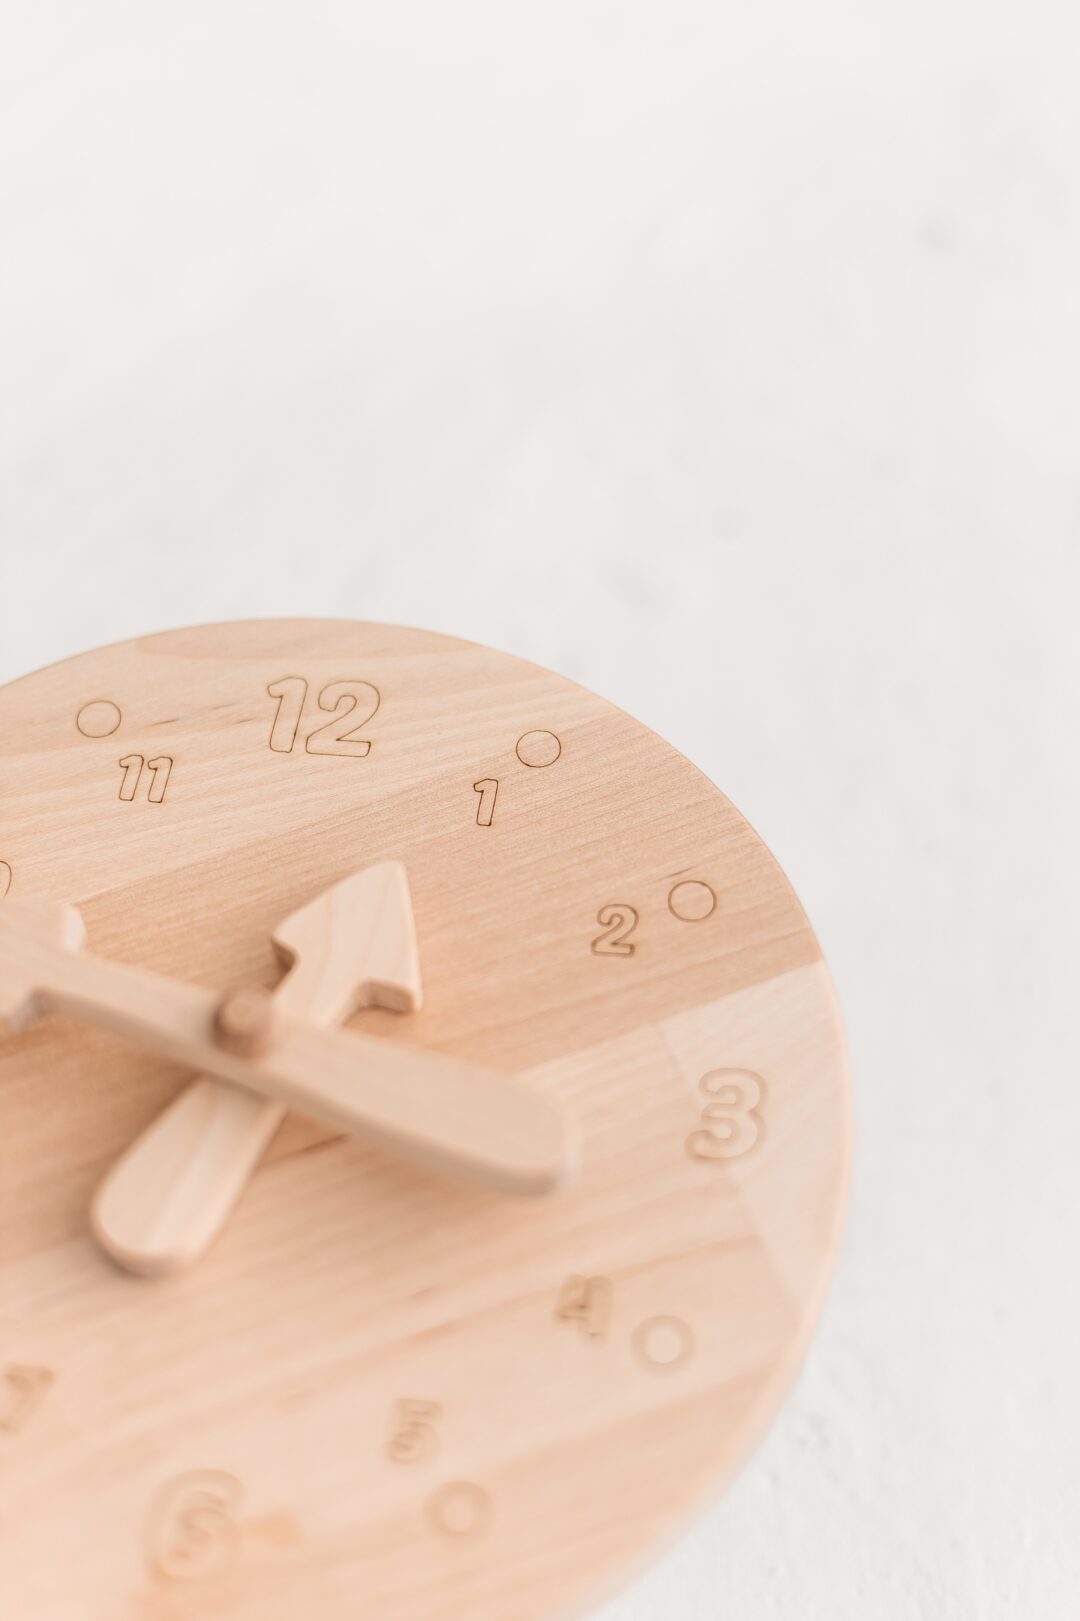 This wooden clock toy is the perfect addition to your Montessori materials collection.